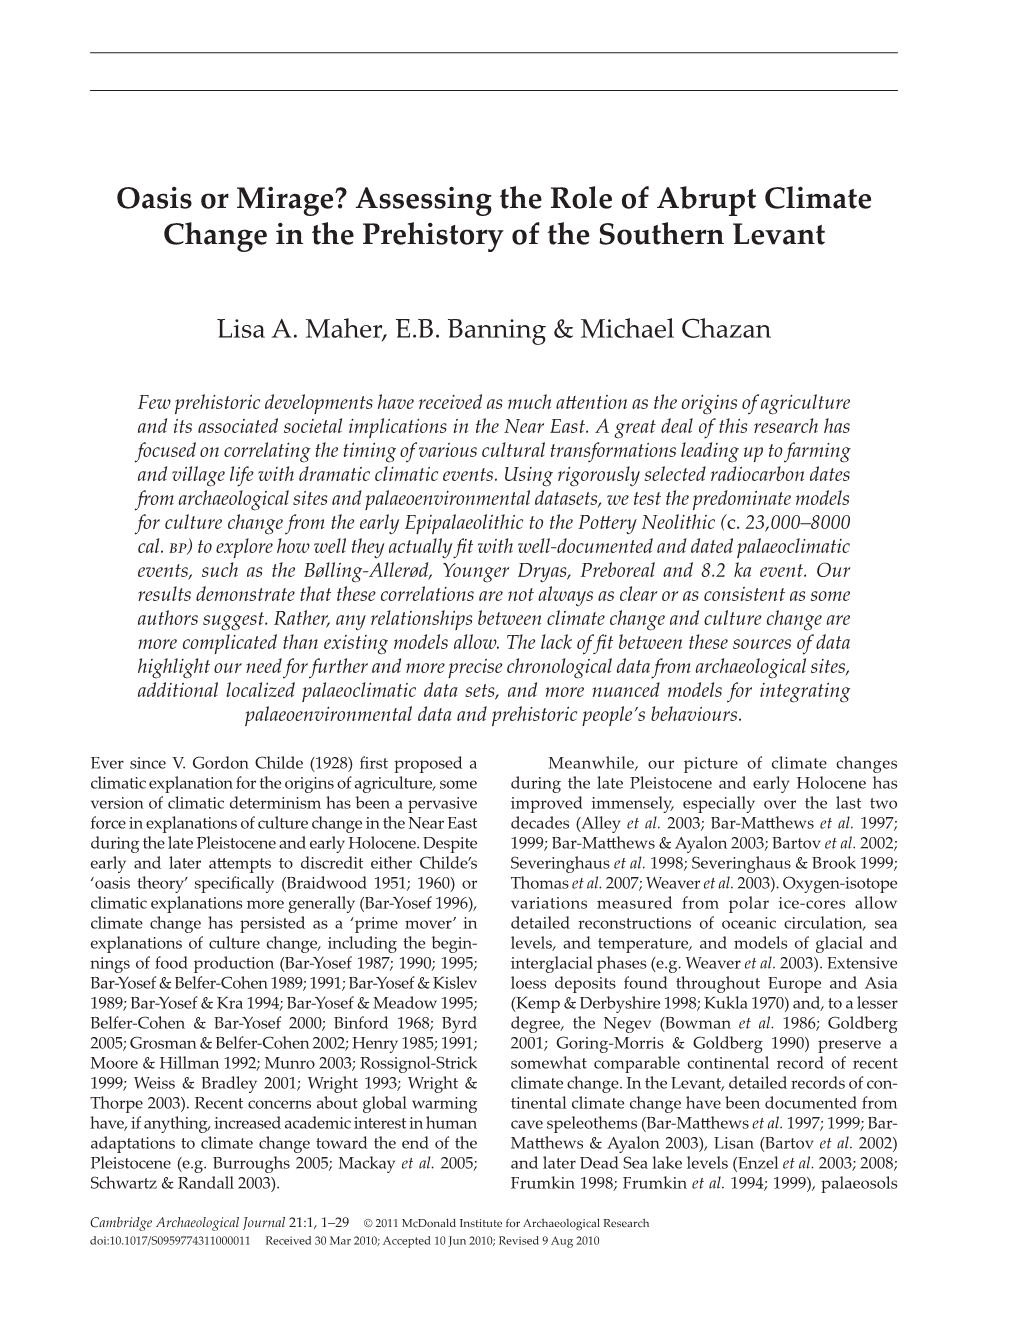 Oasis Or Mirage? Assessing the Role of Abrupt Climate Change in the Prehistory of the Southern Levant